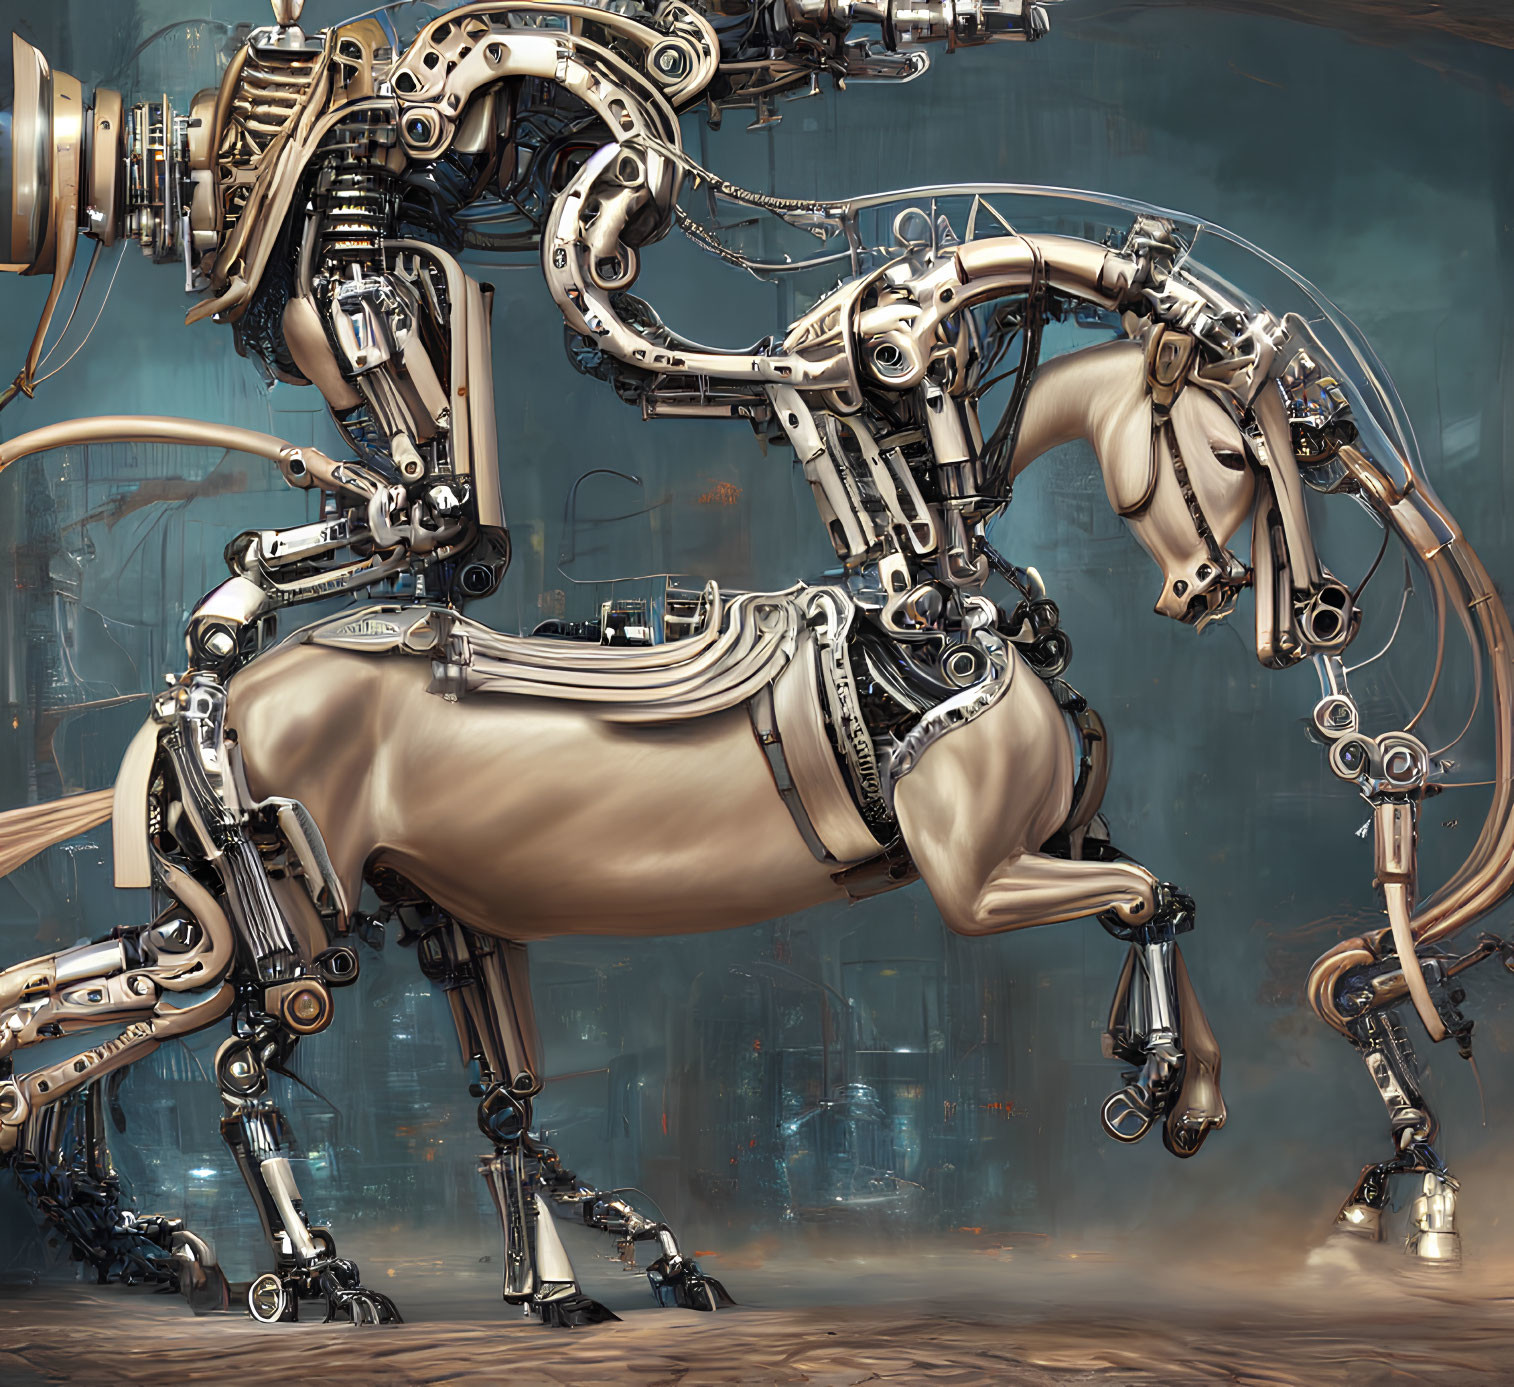 Detailed Image of Mechanical Horse with Futuristic Design in Industrial Setting